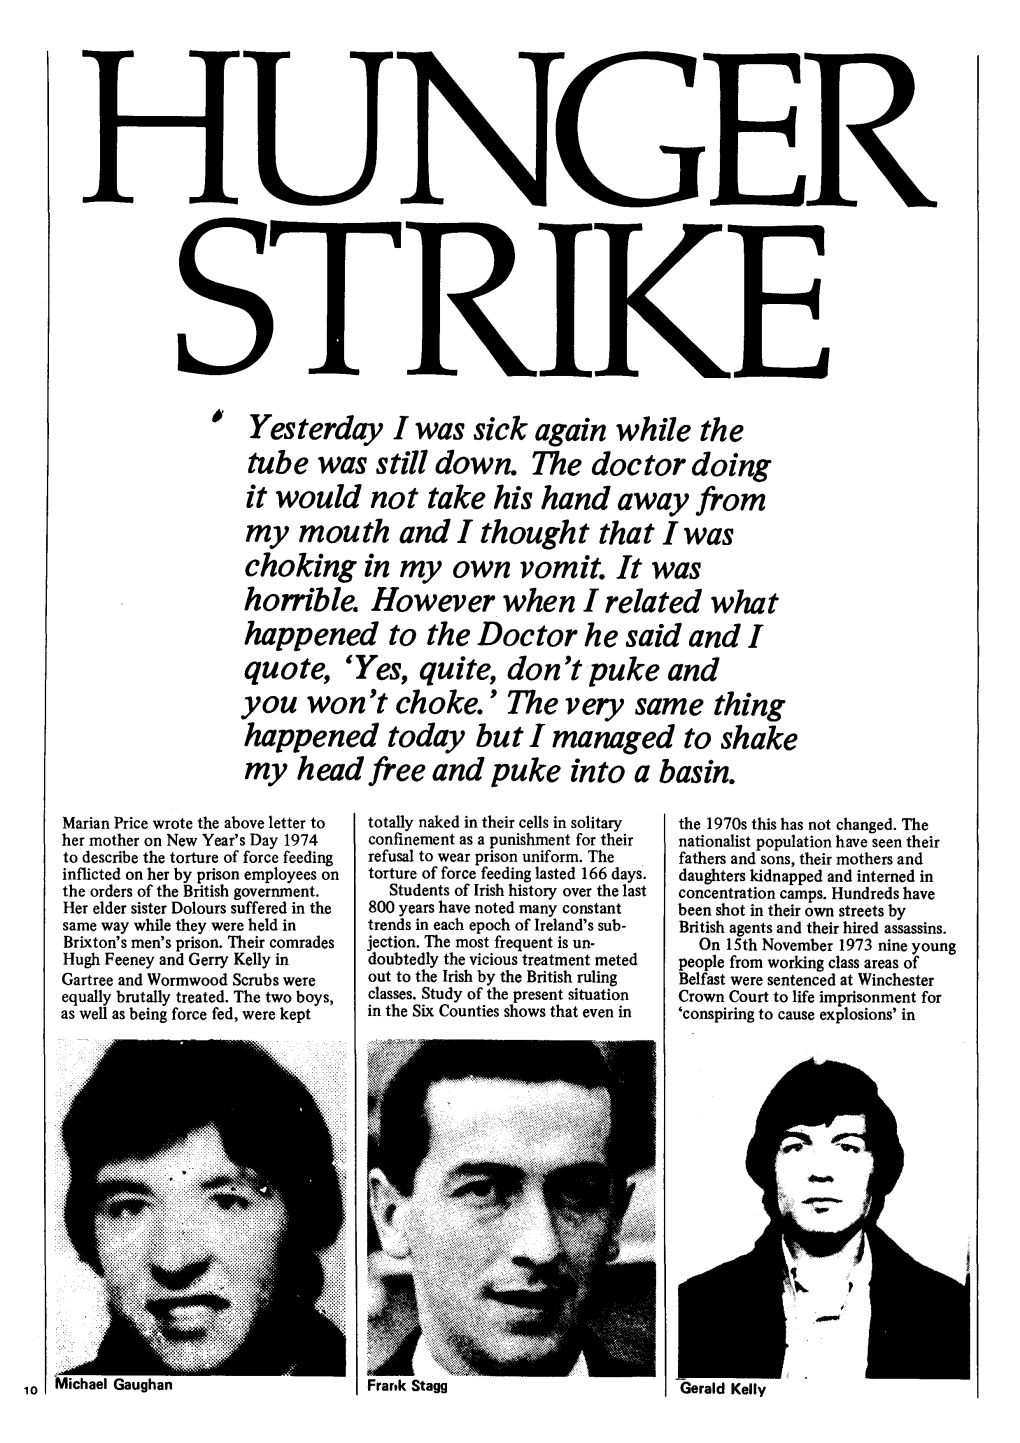 Article on Hungerstrike